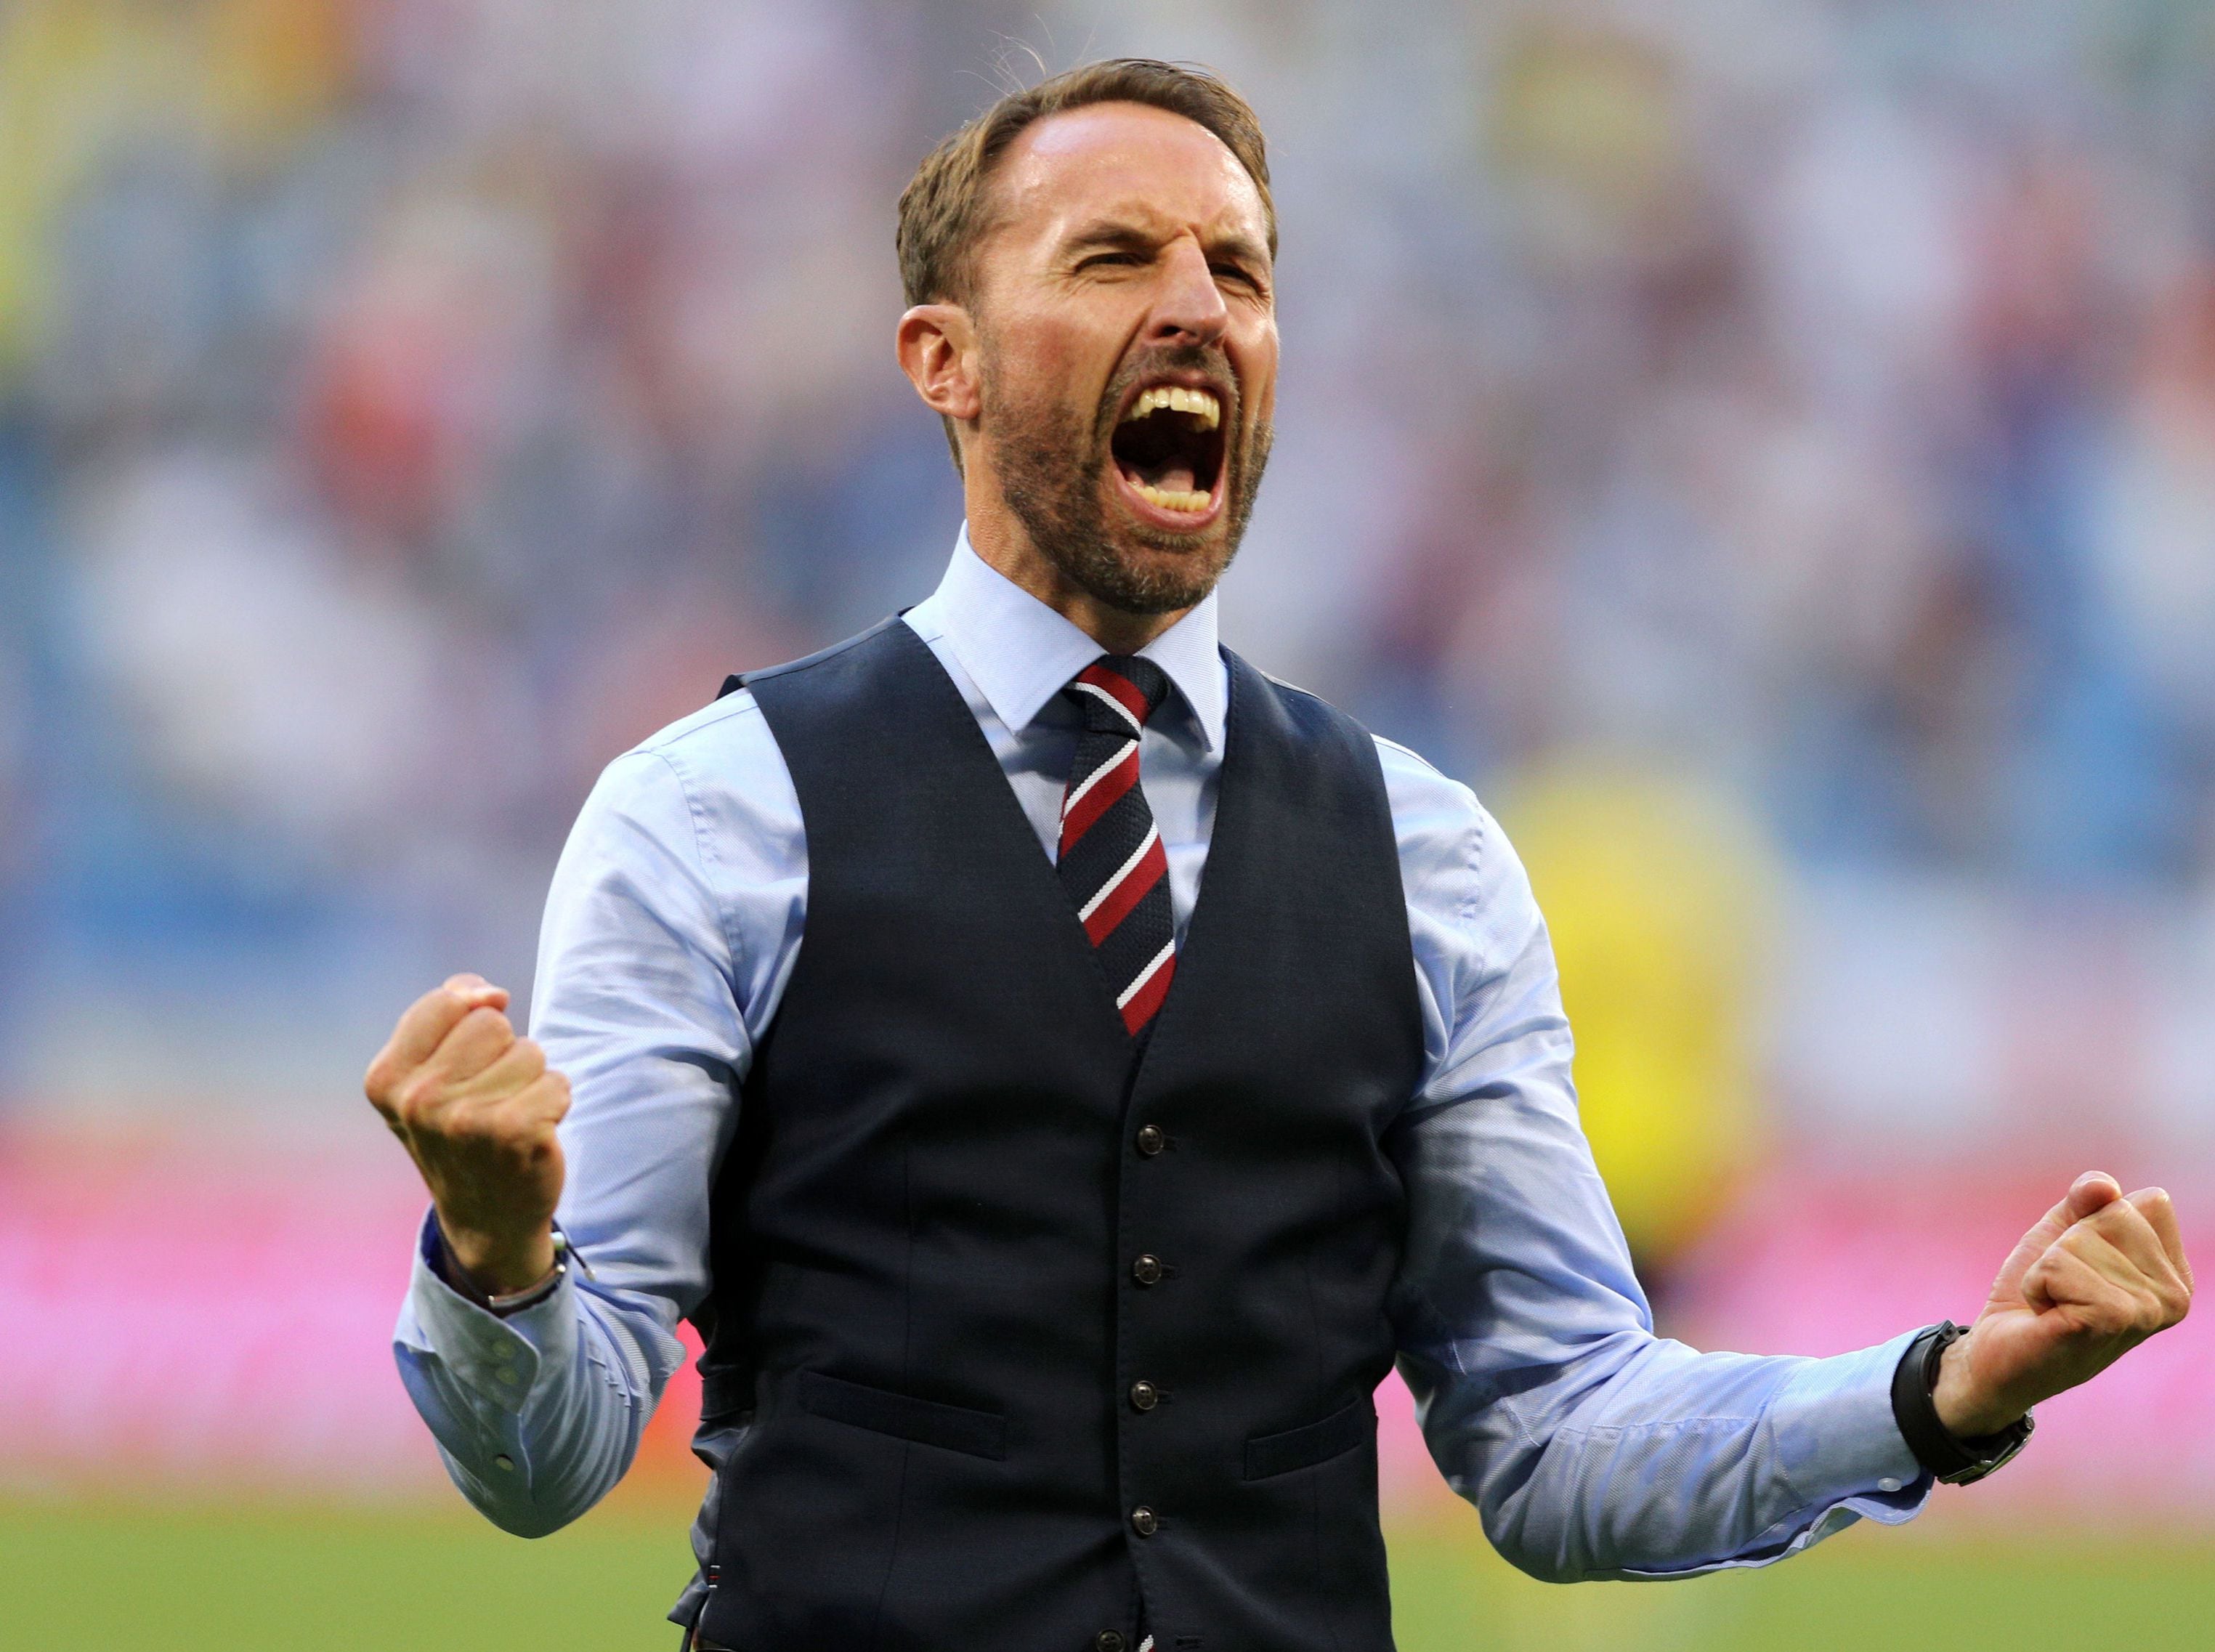 'Time for a new chapter': Gareth Southgate steps down as England manager